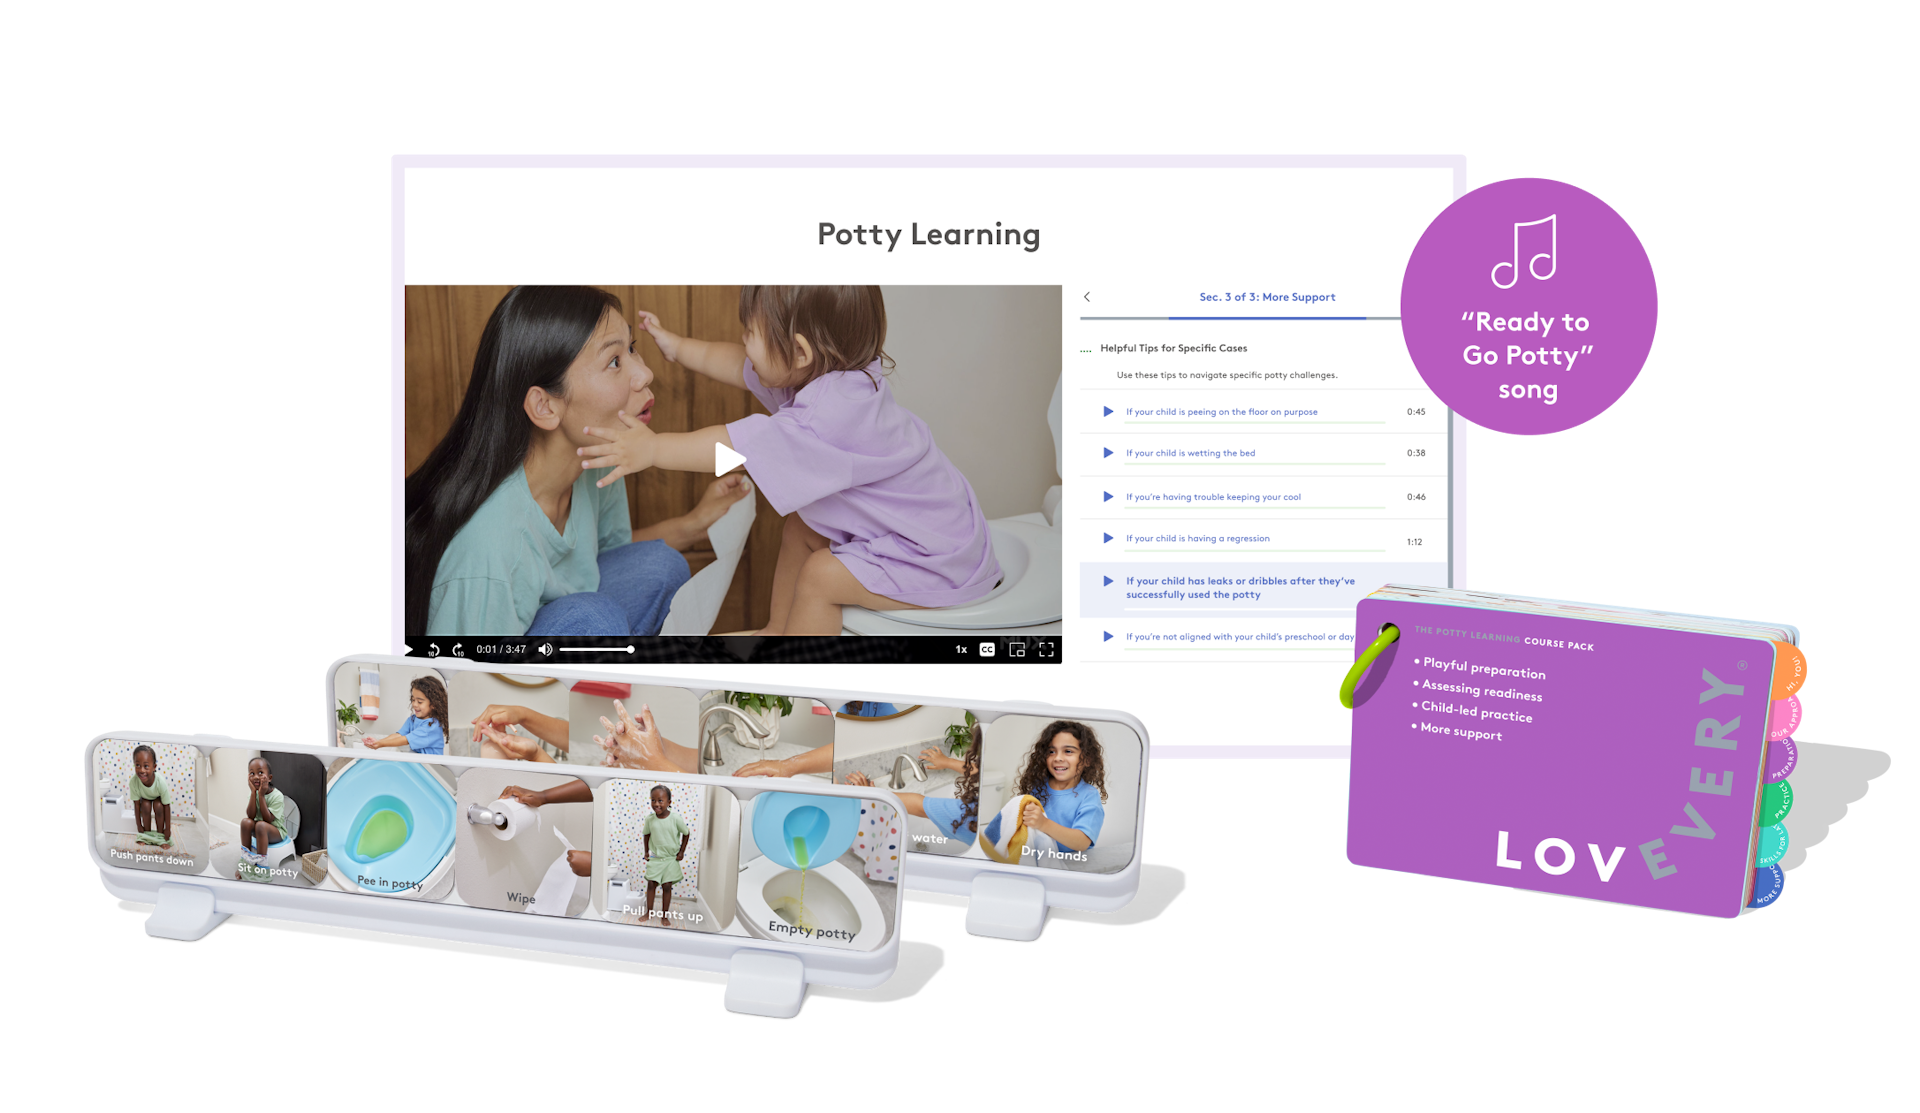 The Potty Learning Course by Lovevery